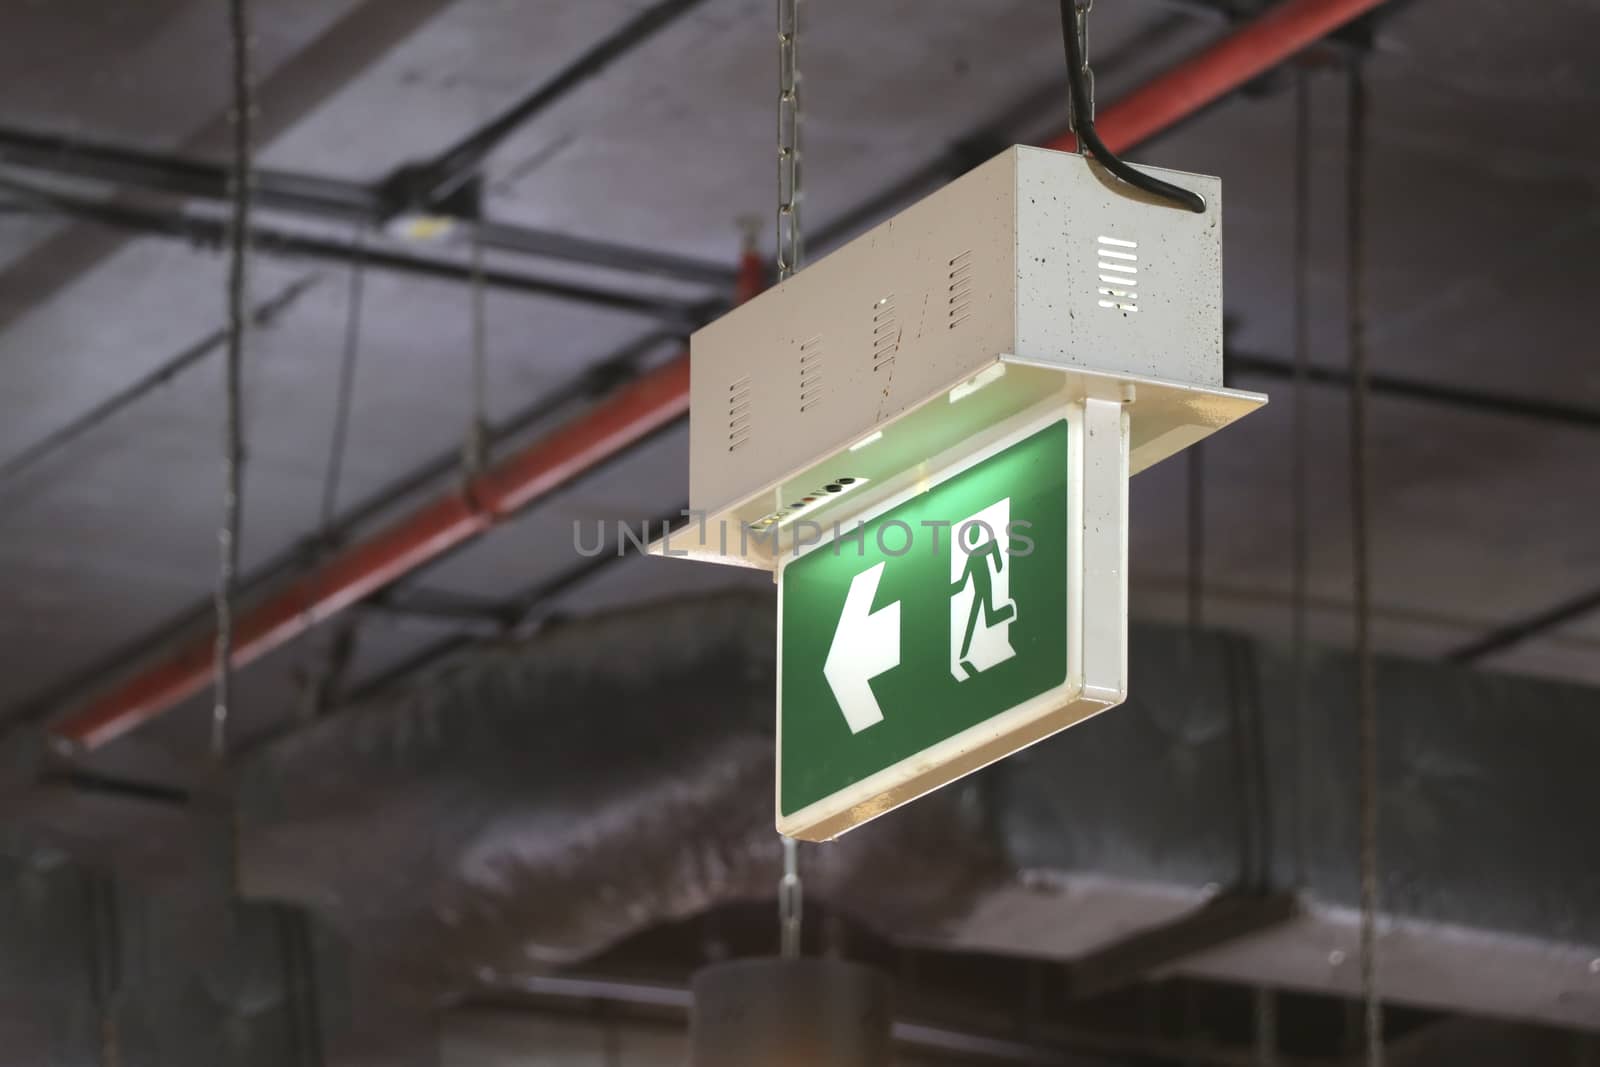 Fire exit sign hanging on top of the building. Fire exit sign indicating safe route.